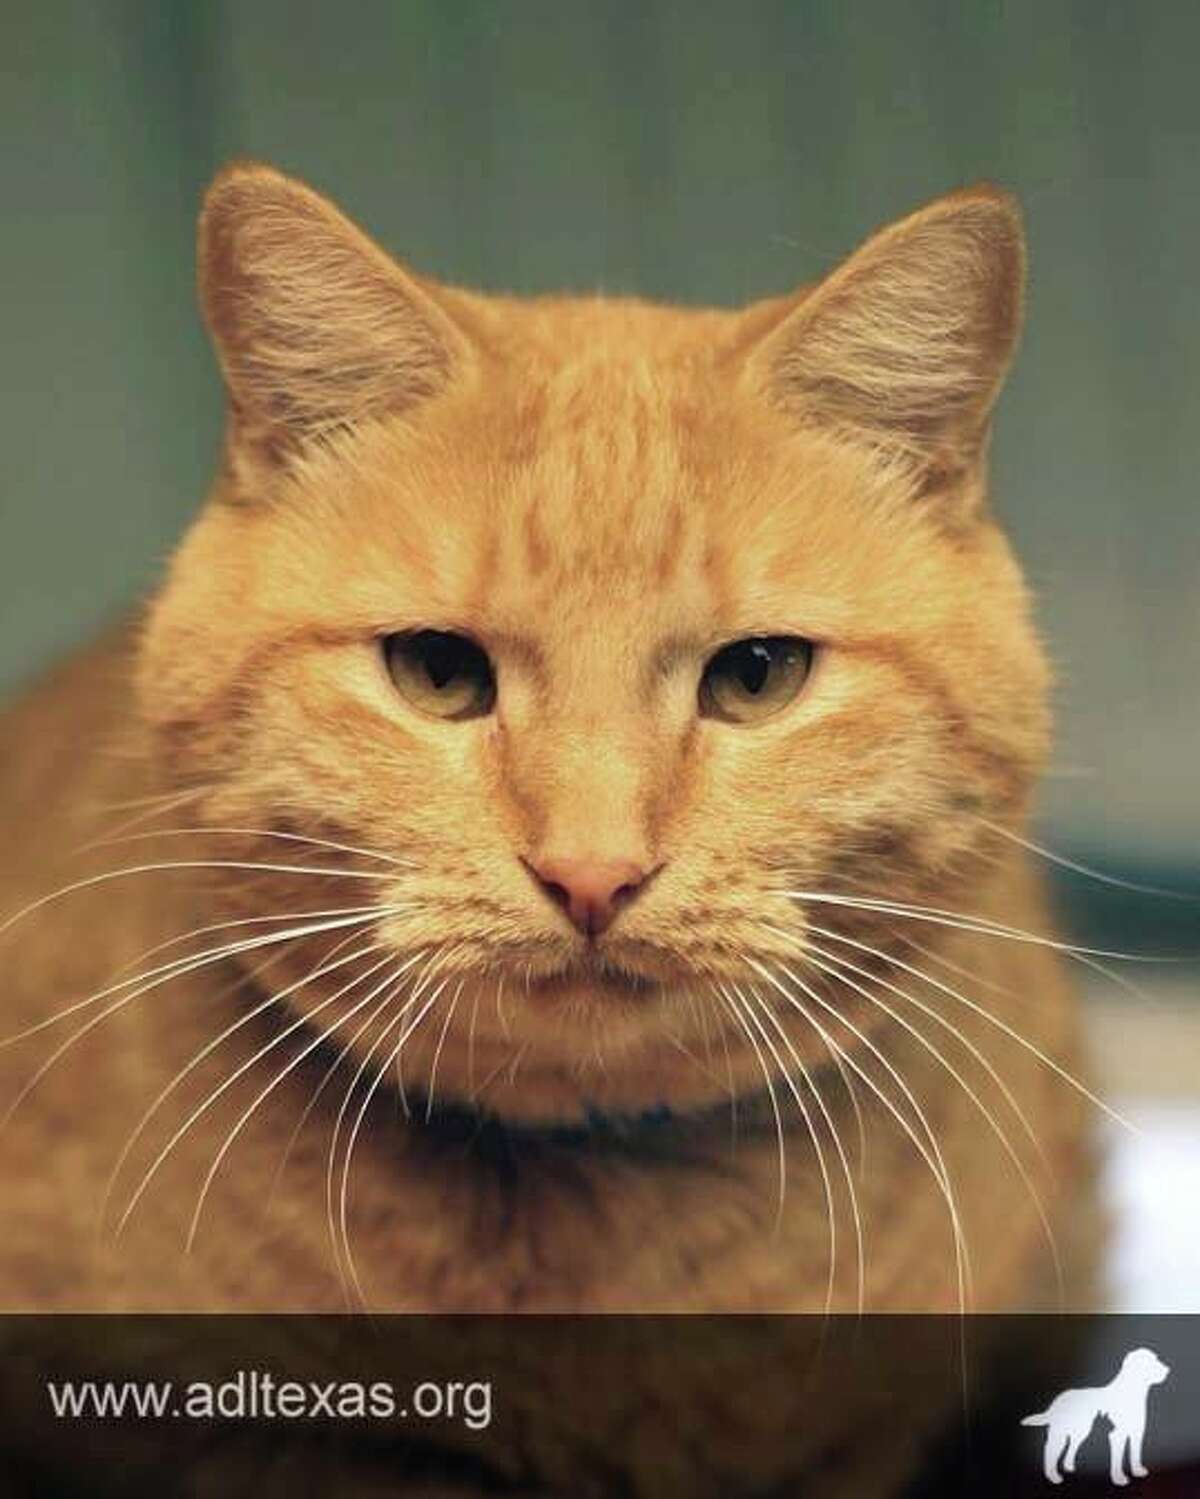 Bruno: I’m a very sweet, affectionate fellow who will greet you at the door when you come home! I enjoy being petted and I promise I'll bring all the love and happiness I can into your family!